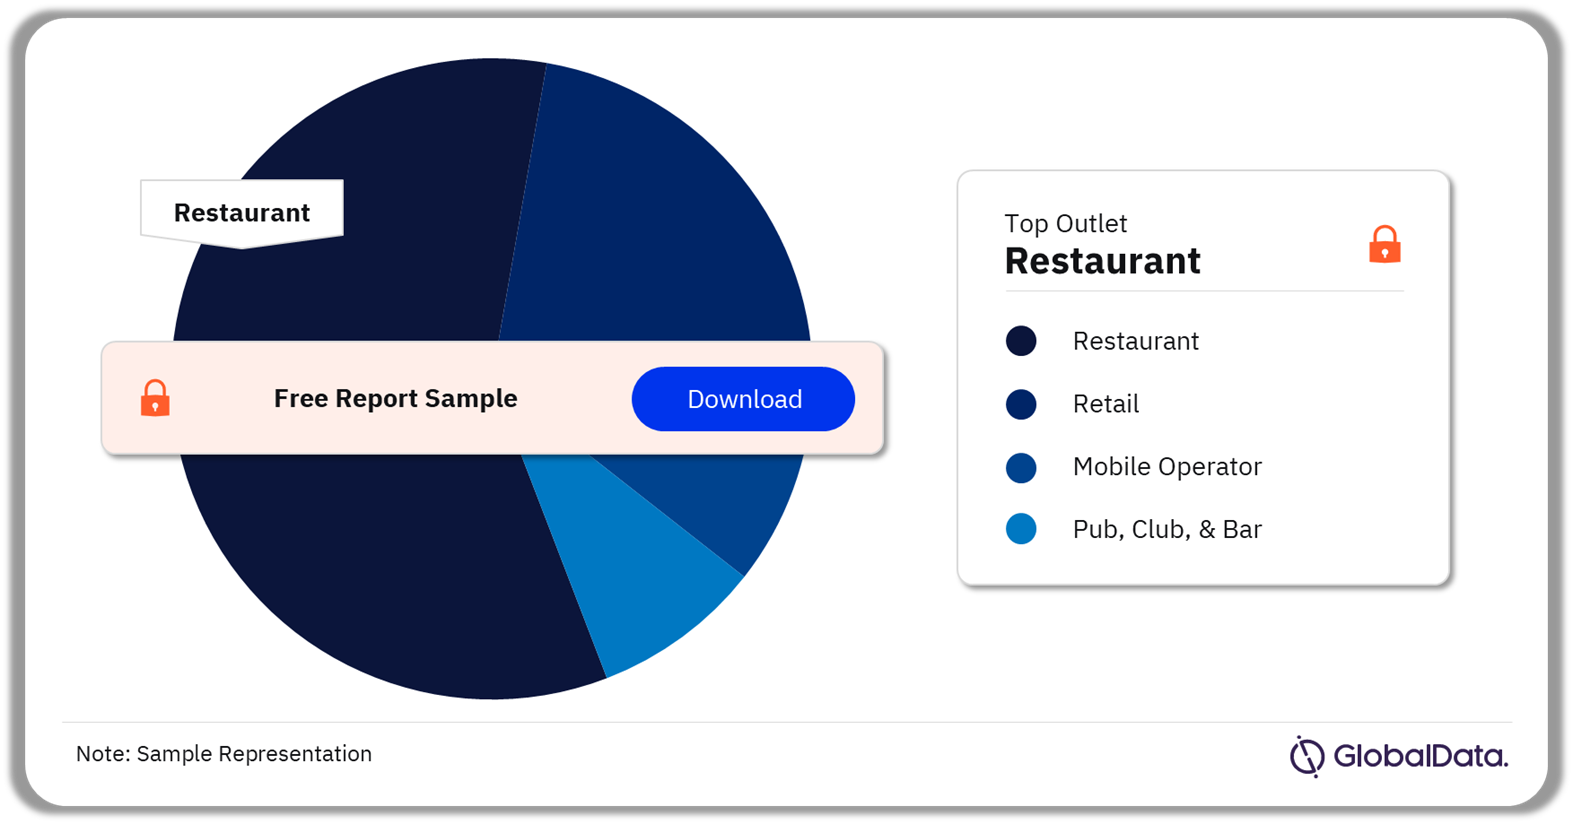 Online Food Delivery Market Share by Outlet Type, 2023 (%)